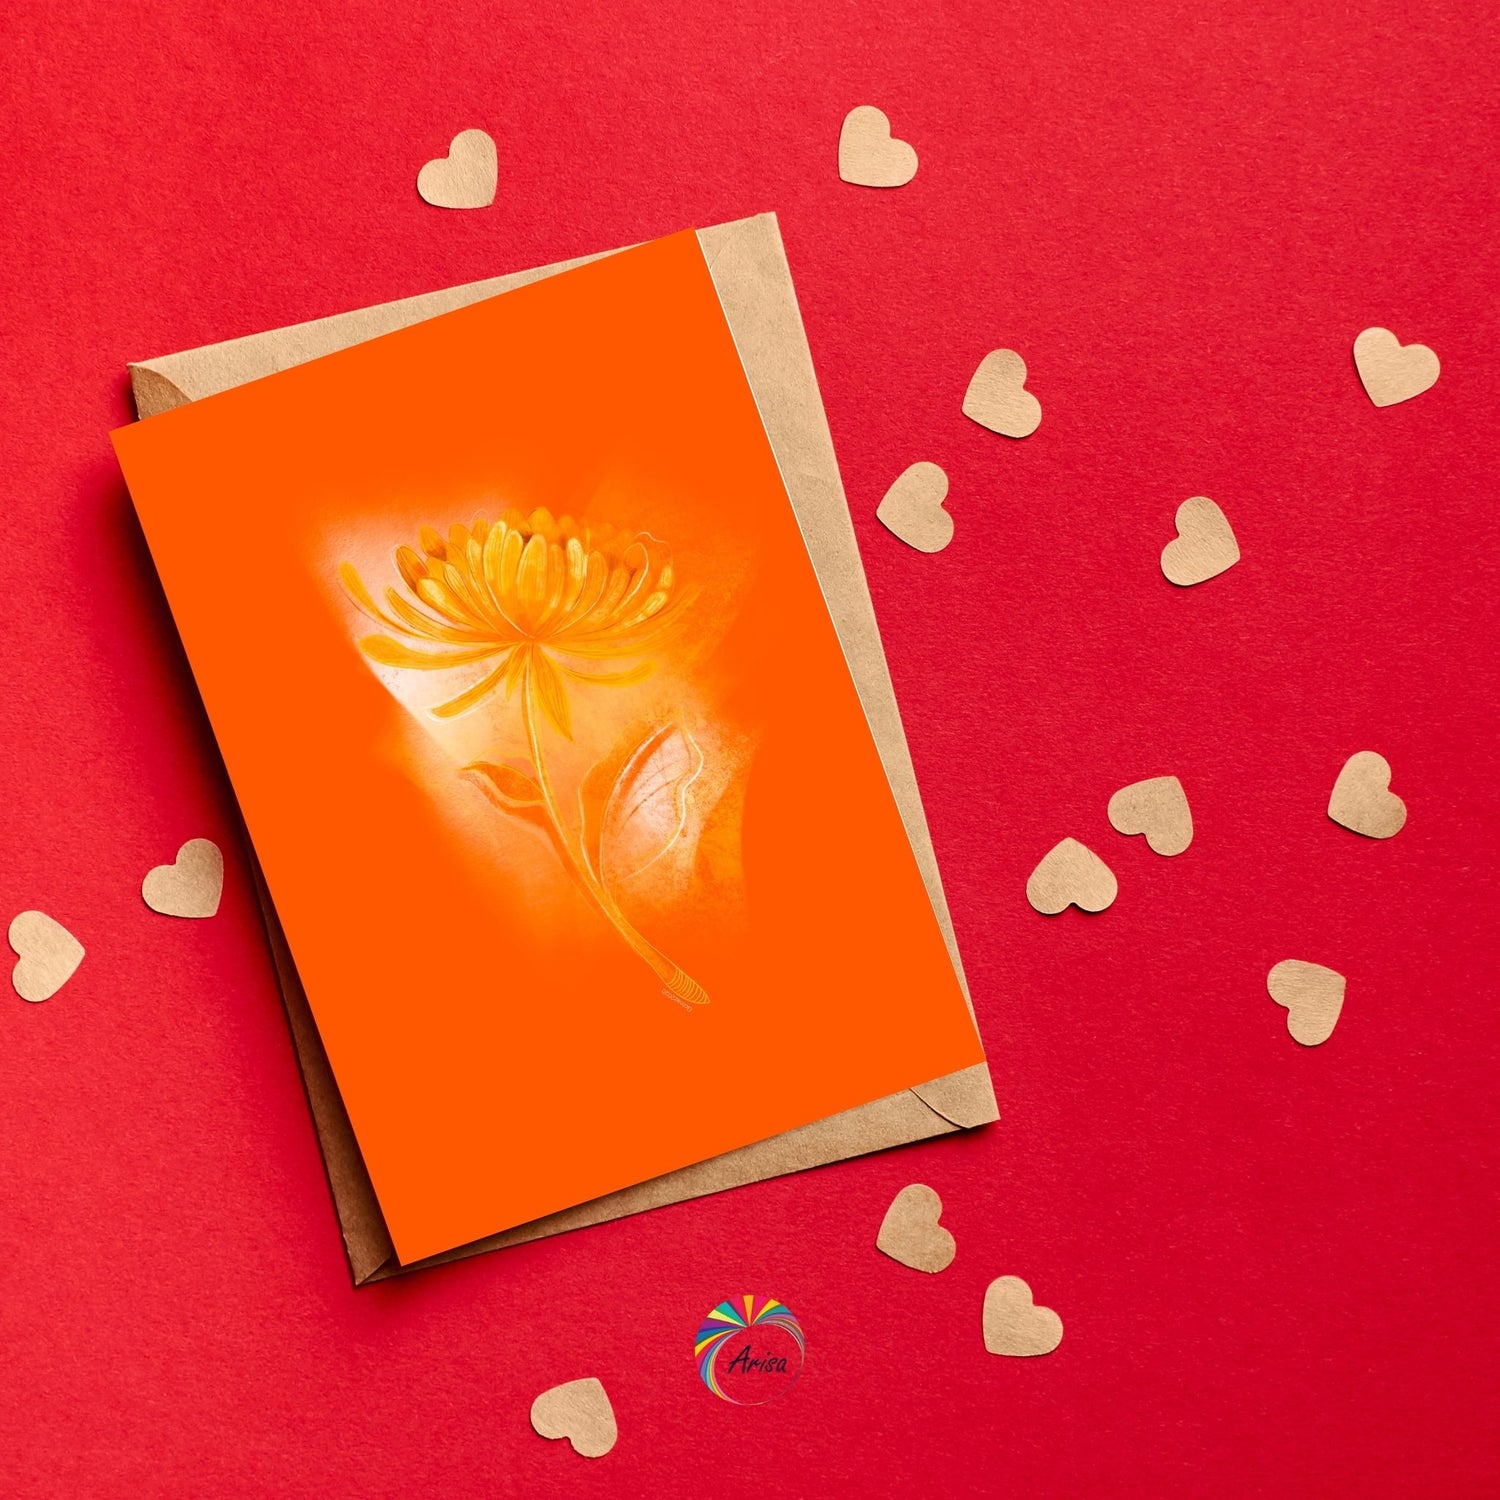 "Chrysanthemum" Greeting Card by ArisaTeam surrounded by small hearts in a red background ideal as a Valentine card.